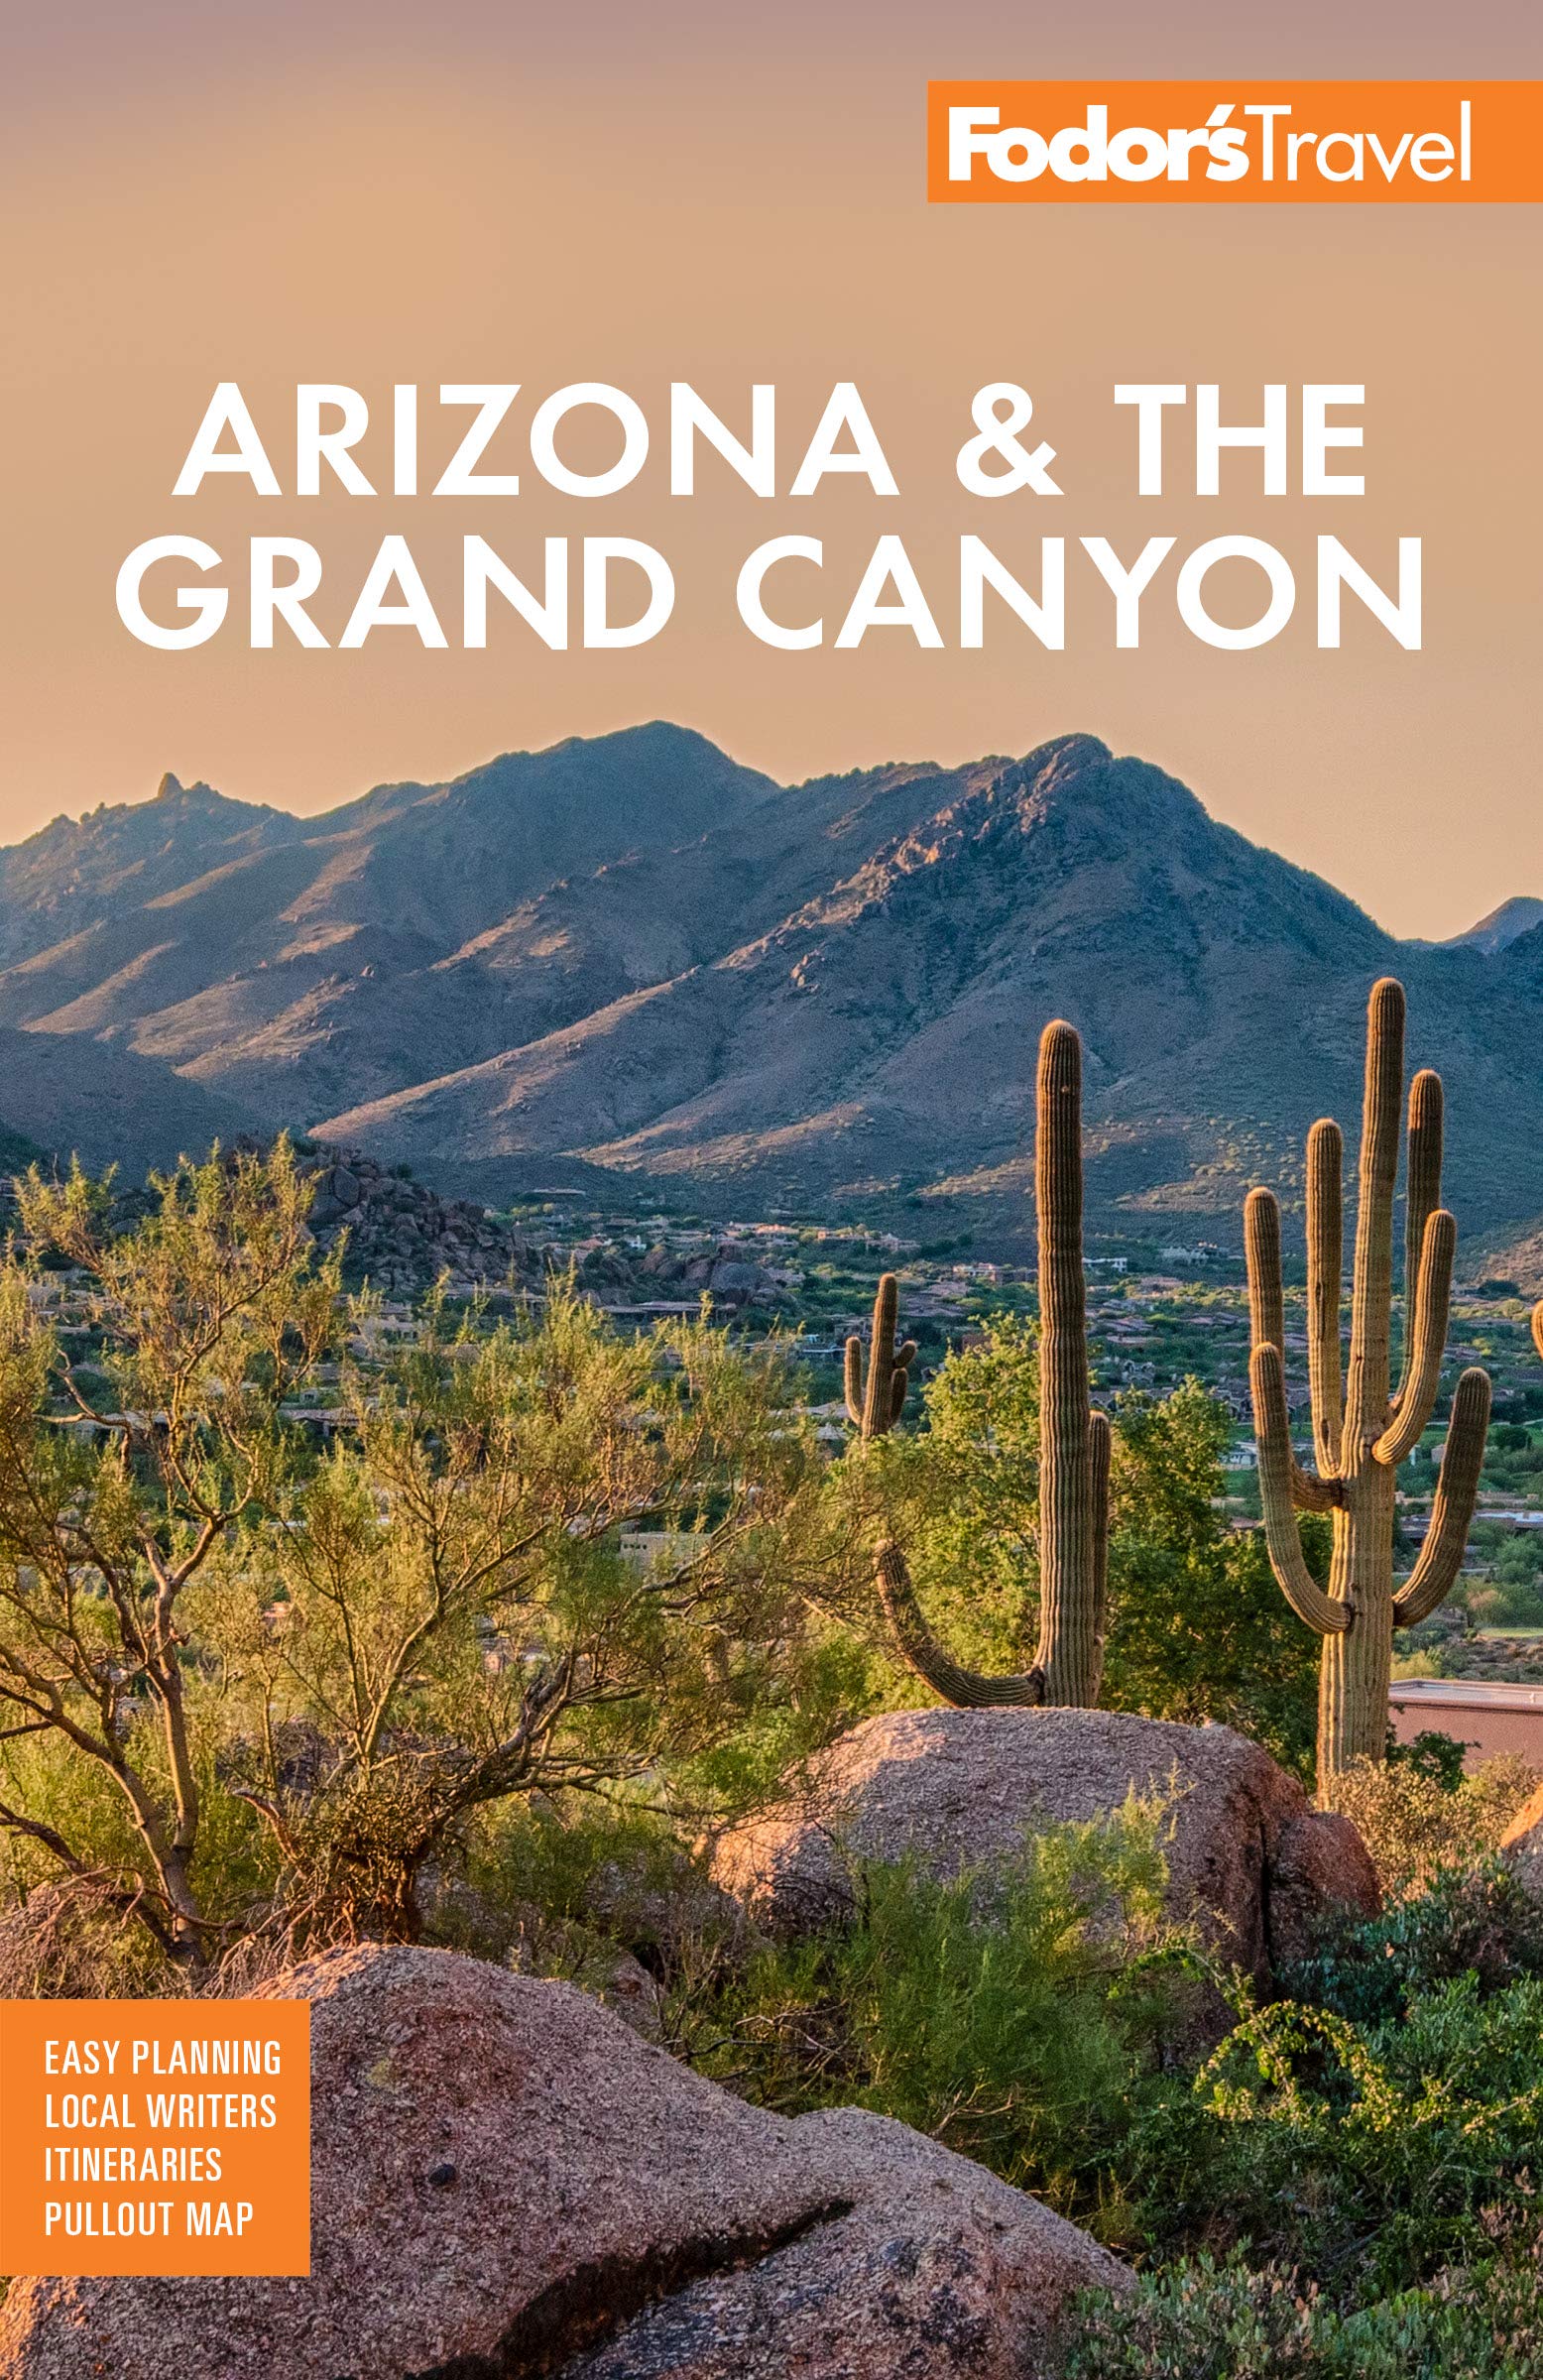 Fodor's Arizona & the Grand Canyon (Full-color Travel Guide)